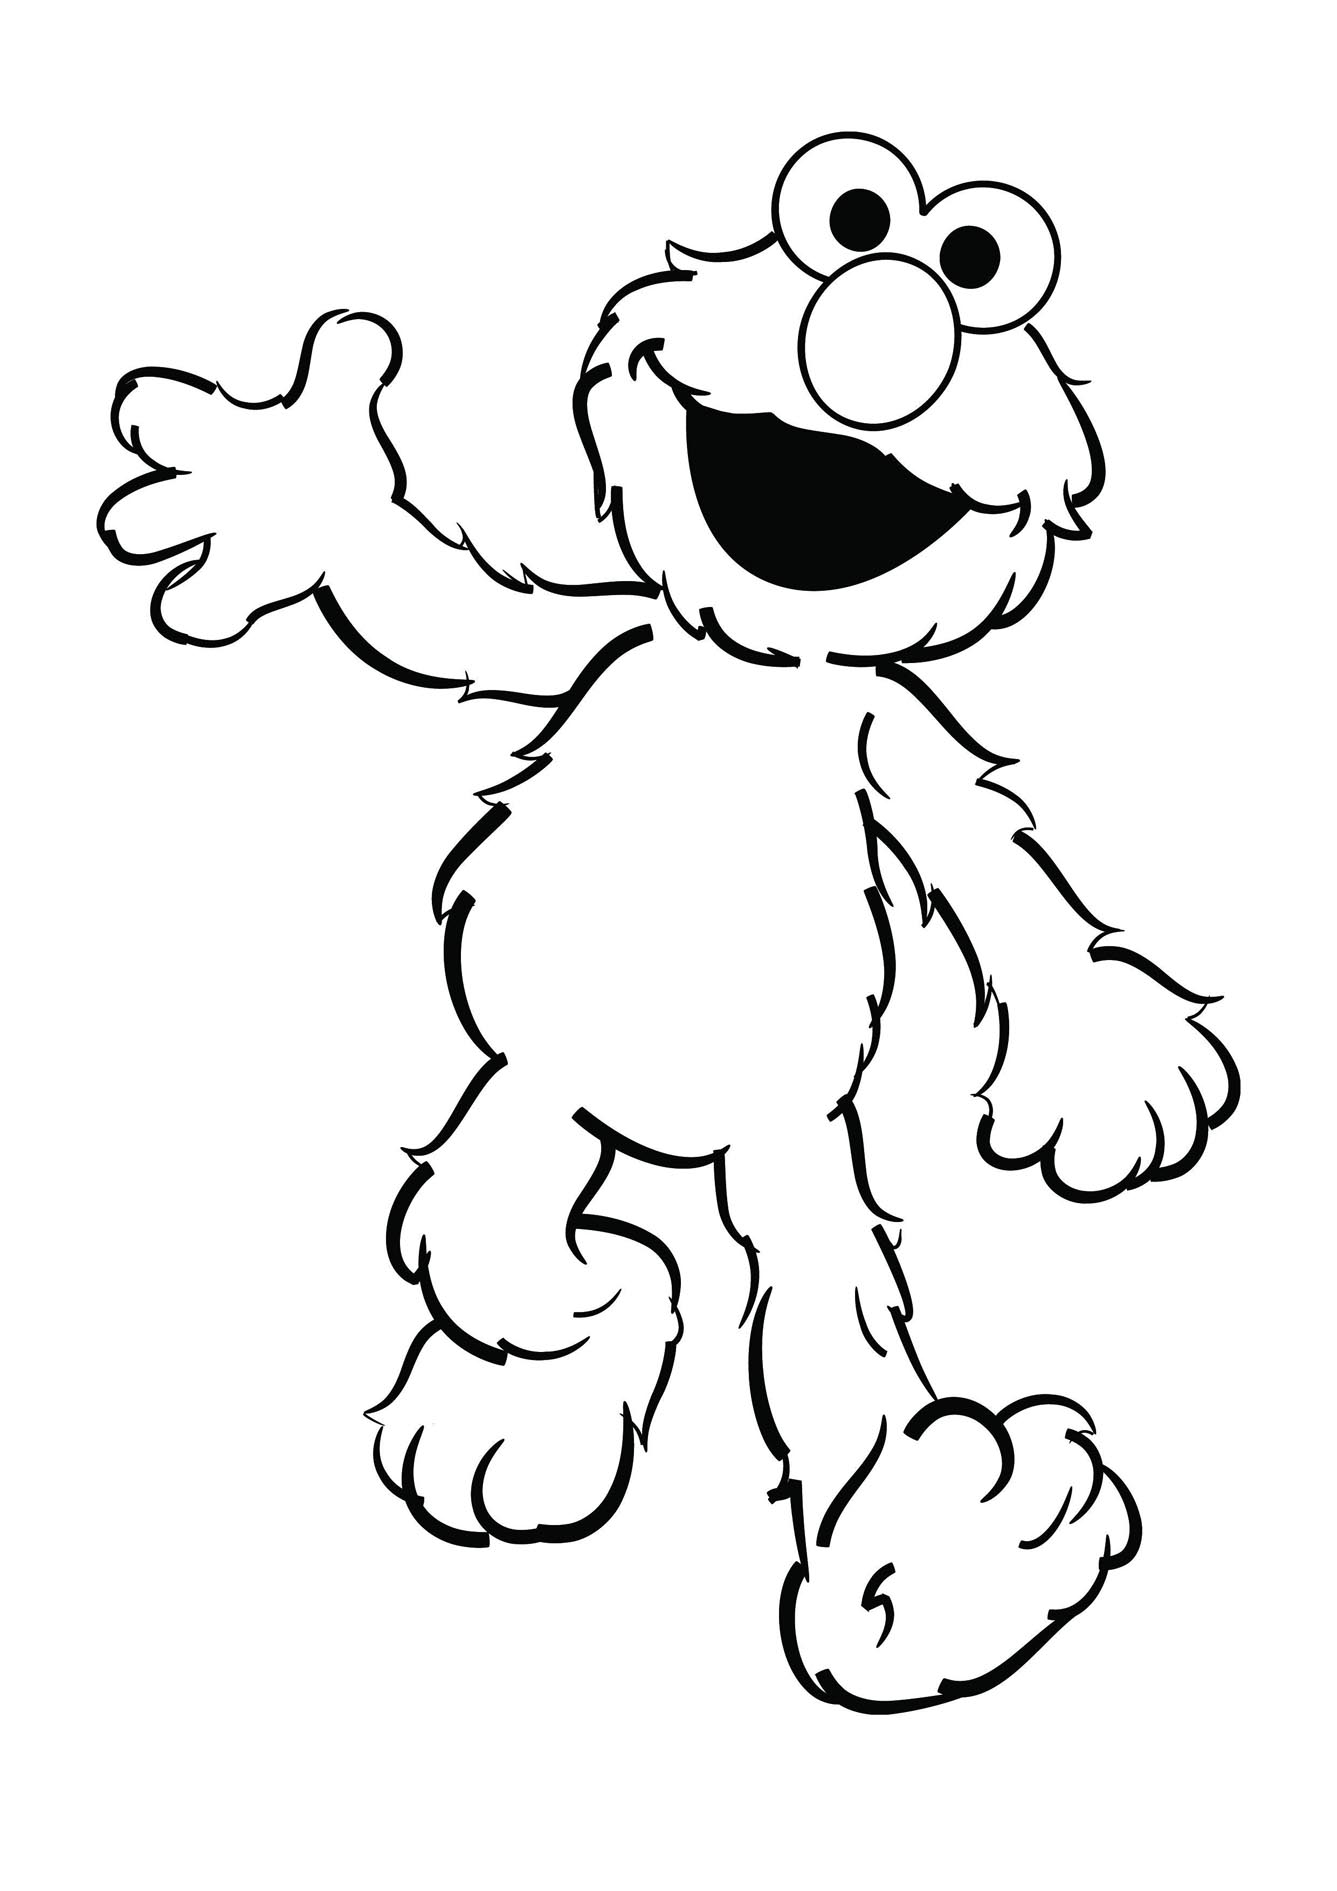 Sesame Street coloring page to print and color for free